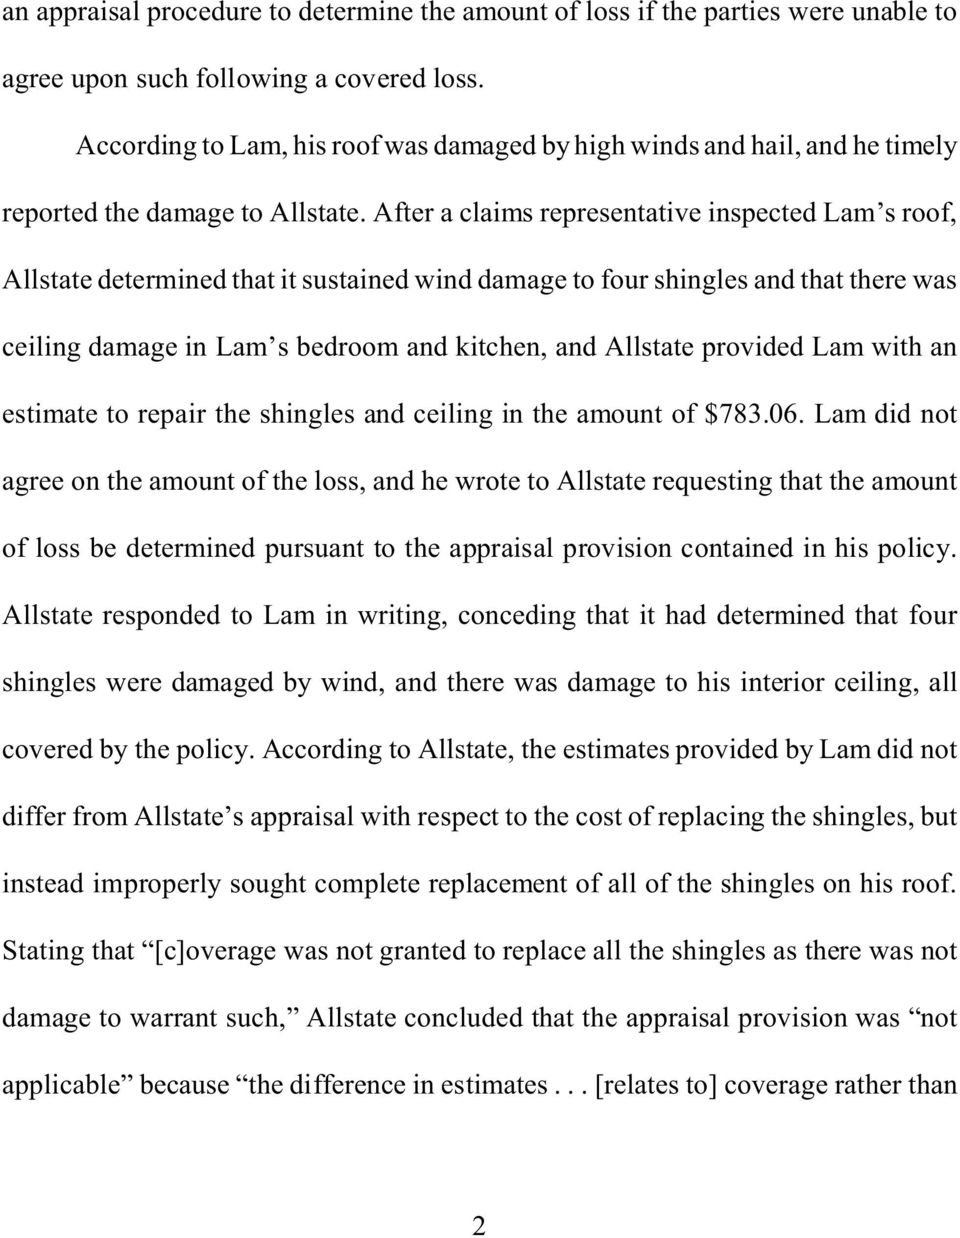 After a claims representative inspected Lam s roof, Allstate determined that it sustained wind damage to four shingles and that there was ceiling damage in Lam s bedroom and kitchen, and Allstate